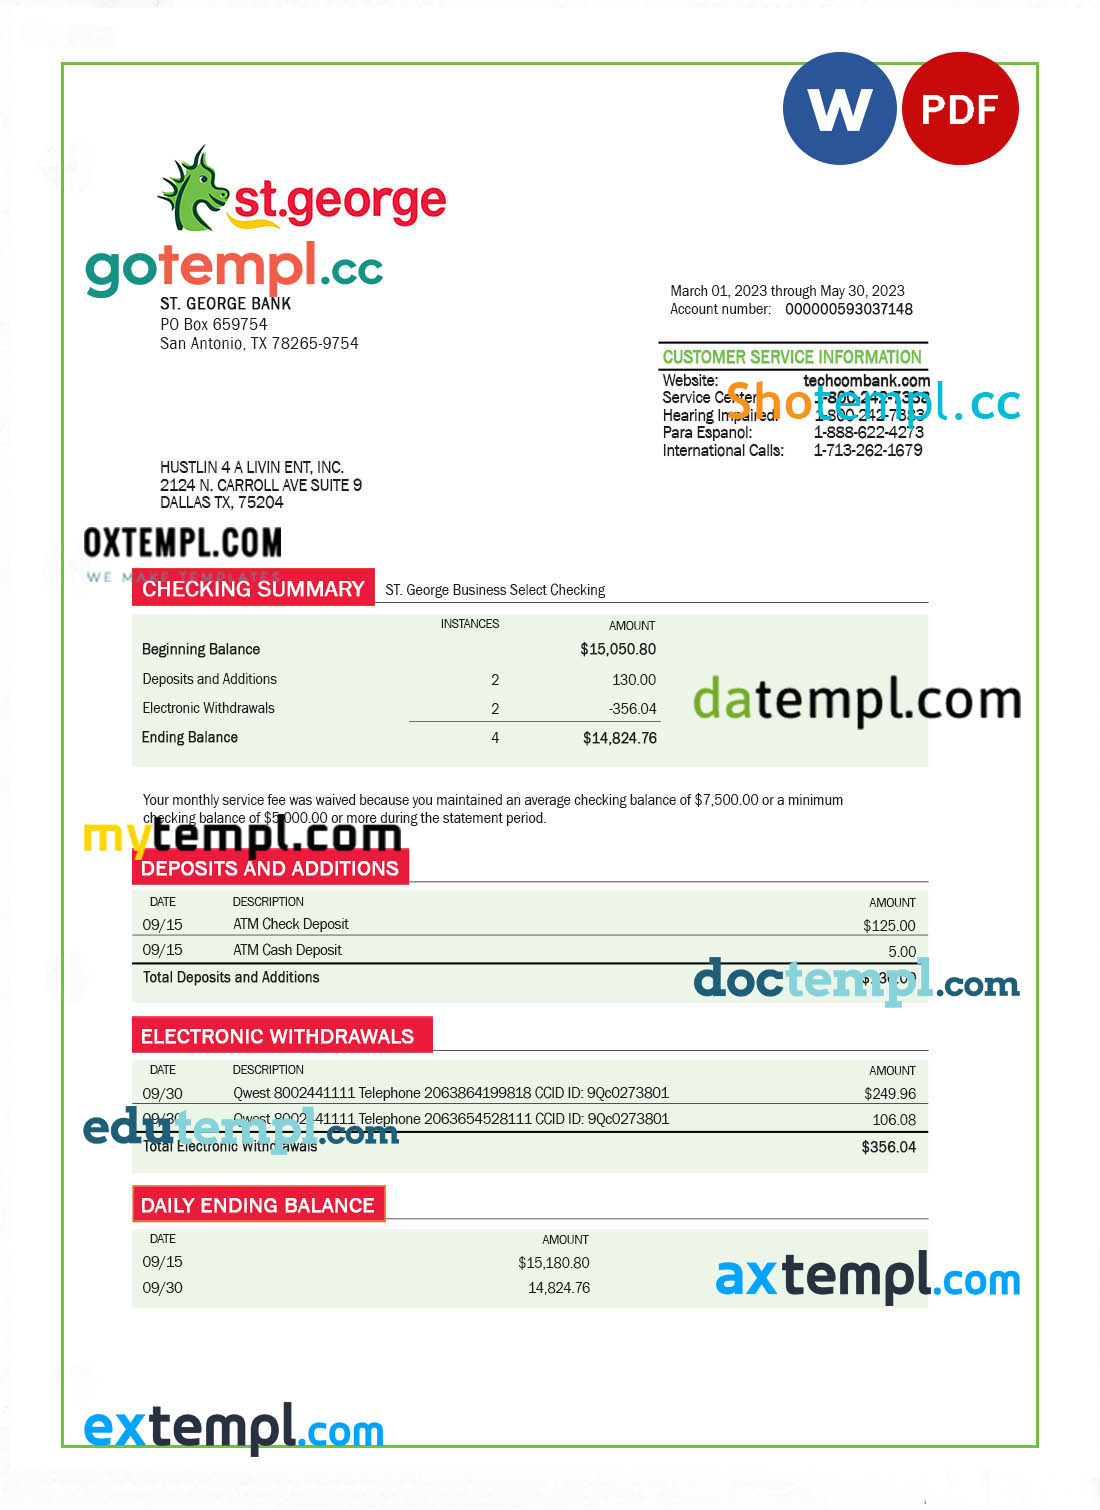 St. George Bank organization statement Word and PDF template